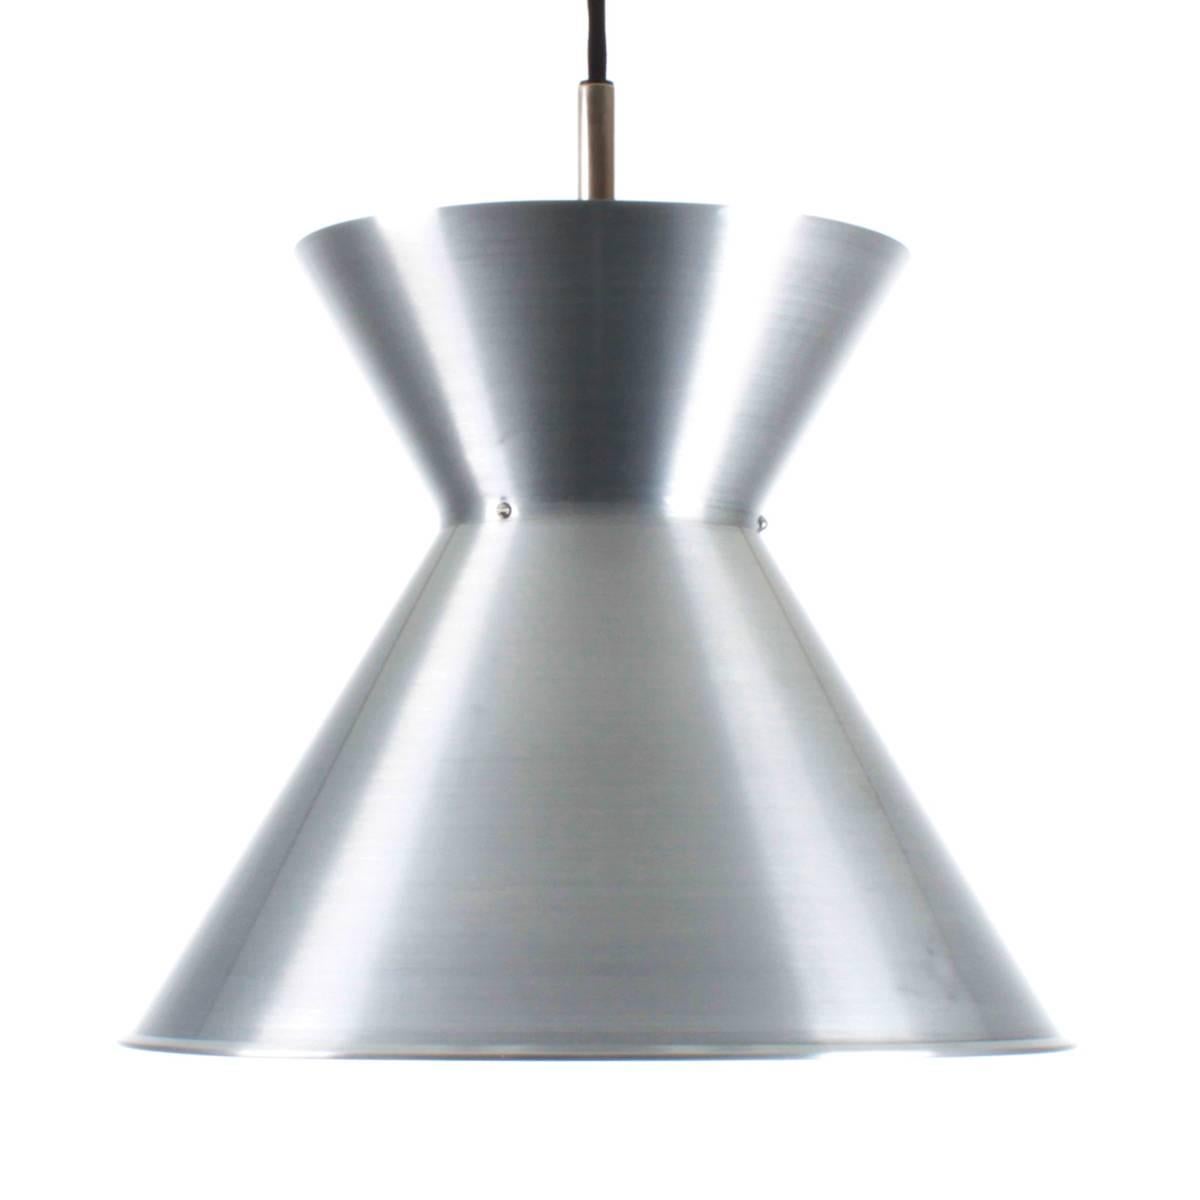 DOBBELTKEGLE aka The Pendant, Danish mid century lighting by internationally acclaimed Danish architect Mogens Koch in 1956, produced by Louis Poulsen - Scandinavian Modern ceiling lights in very good (near excellent) vintage condition.

Extremely